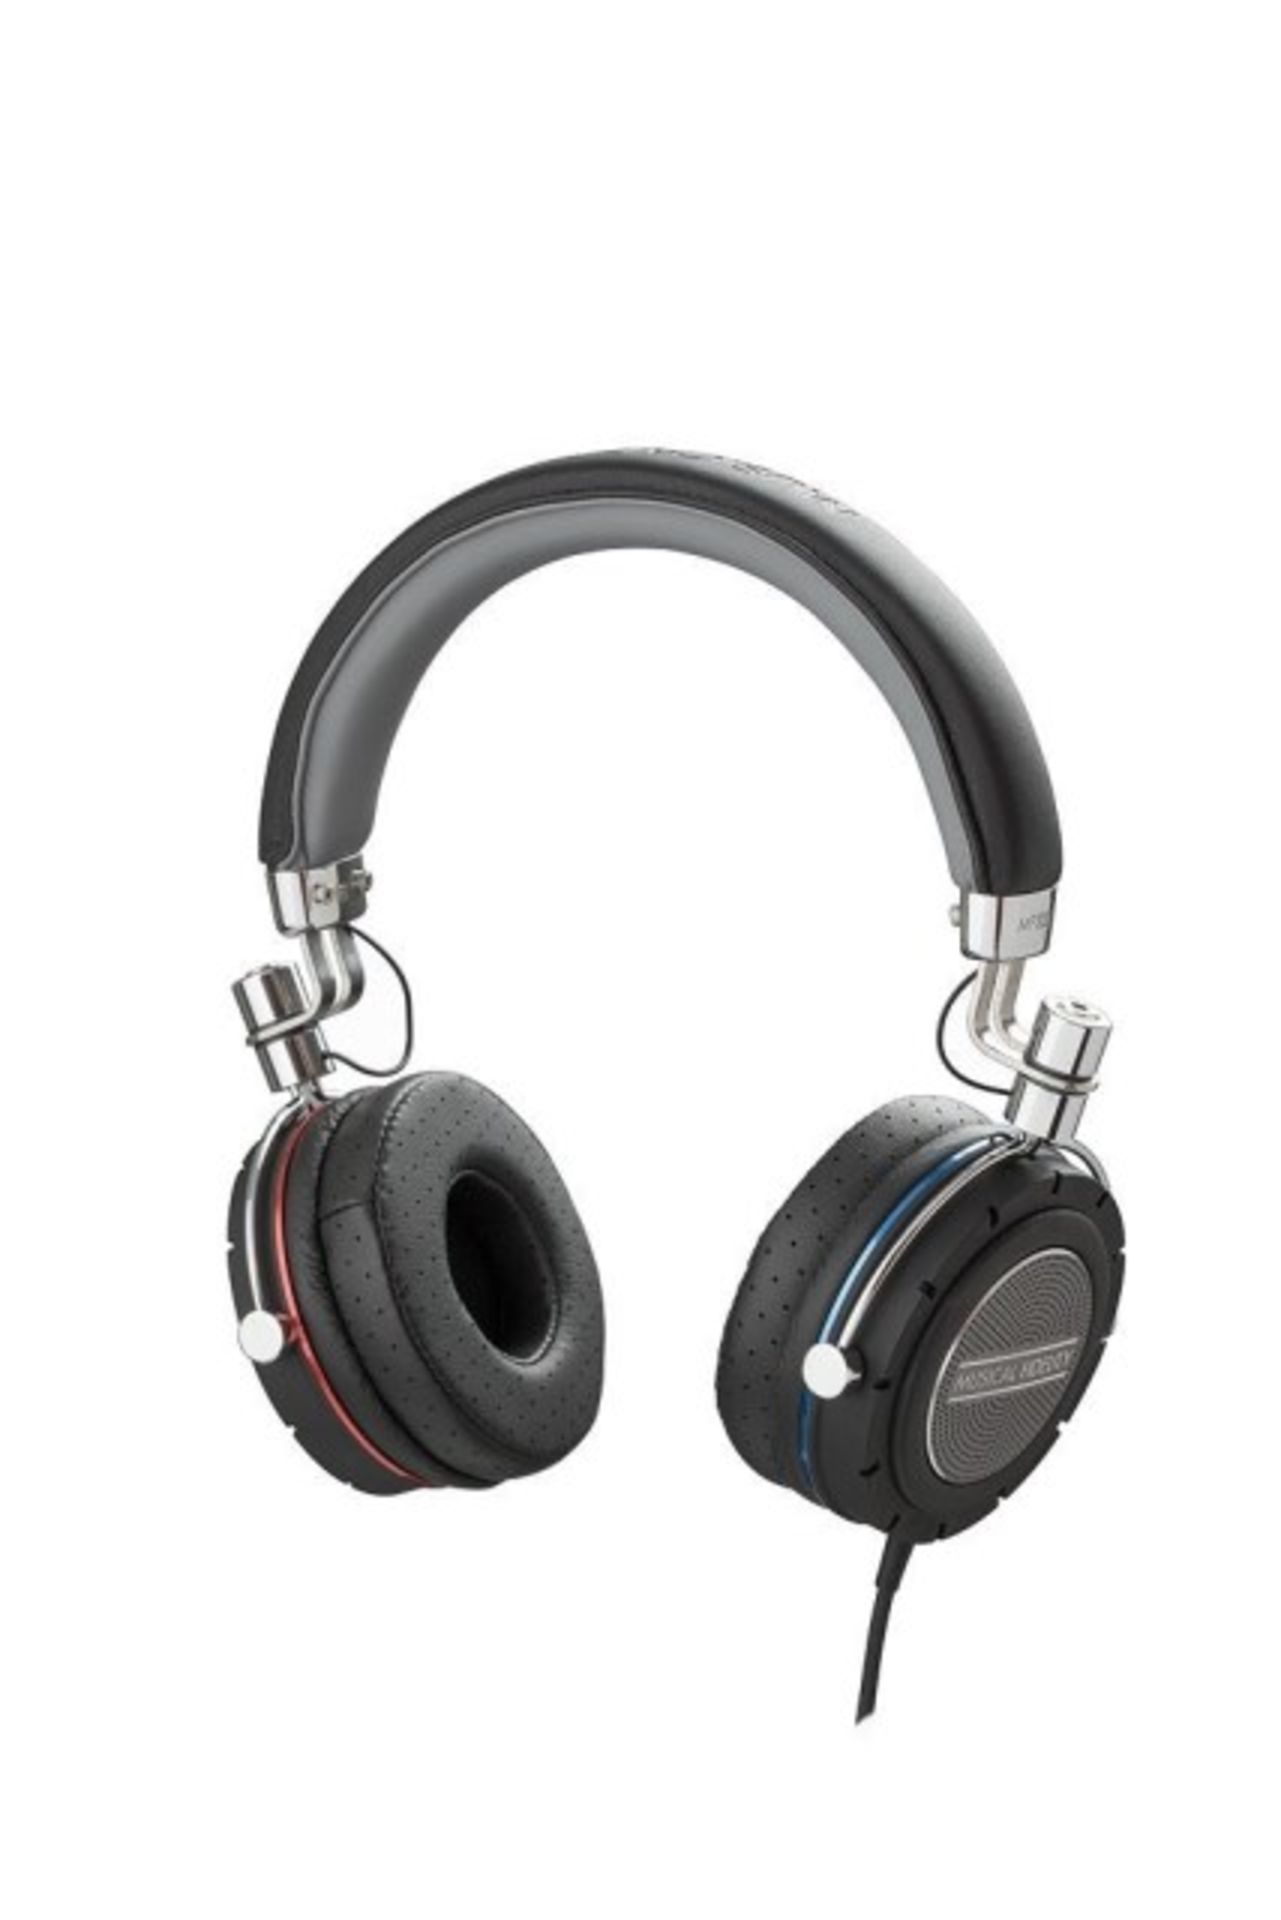 V *TRADE QTY* Brand New Musical Fidelity MF-200 Headphones (Brand New & Sealed) RRP £249 X 10 YOUR